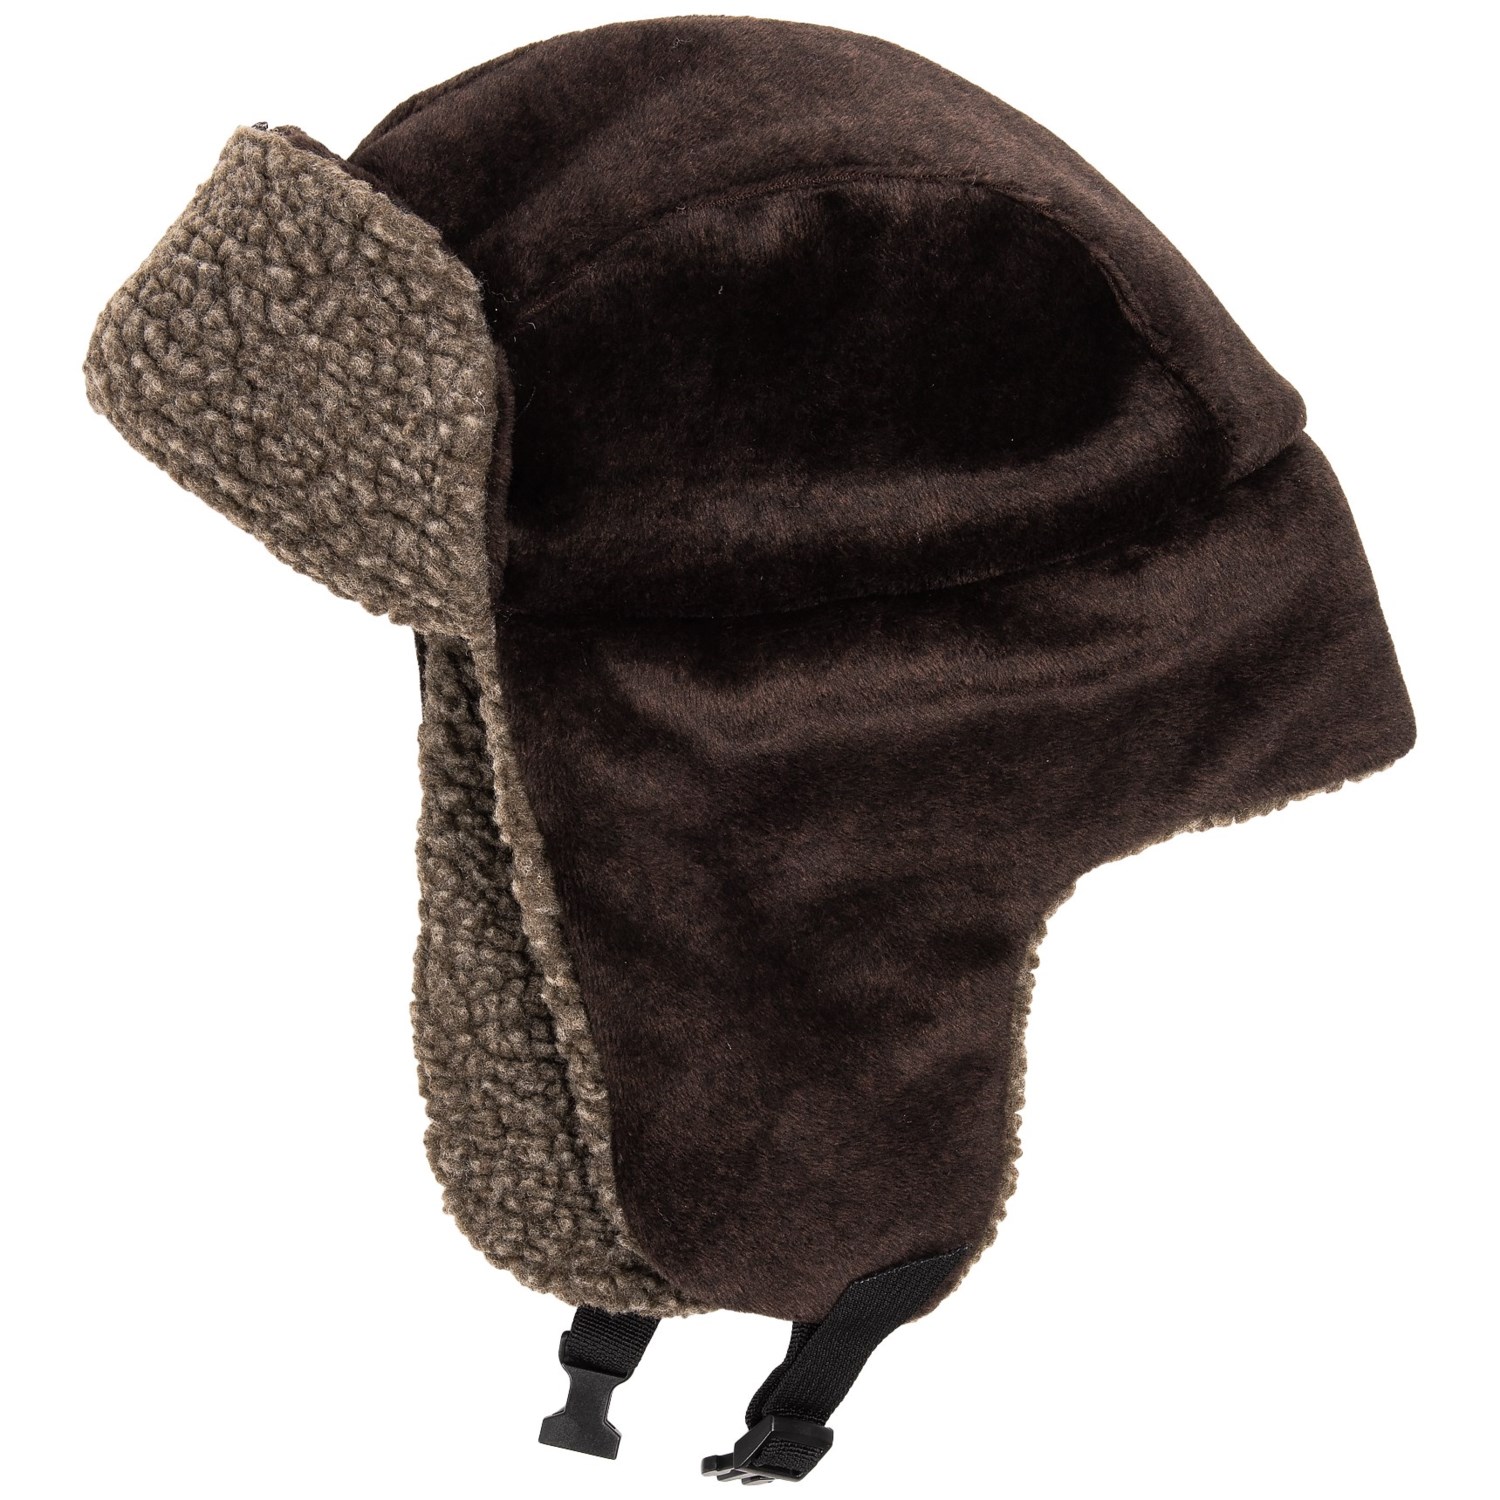 Chaos Sherpa Trapper Hat (For Men) - Save 58%